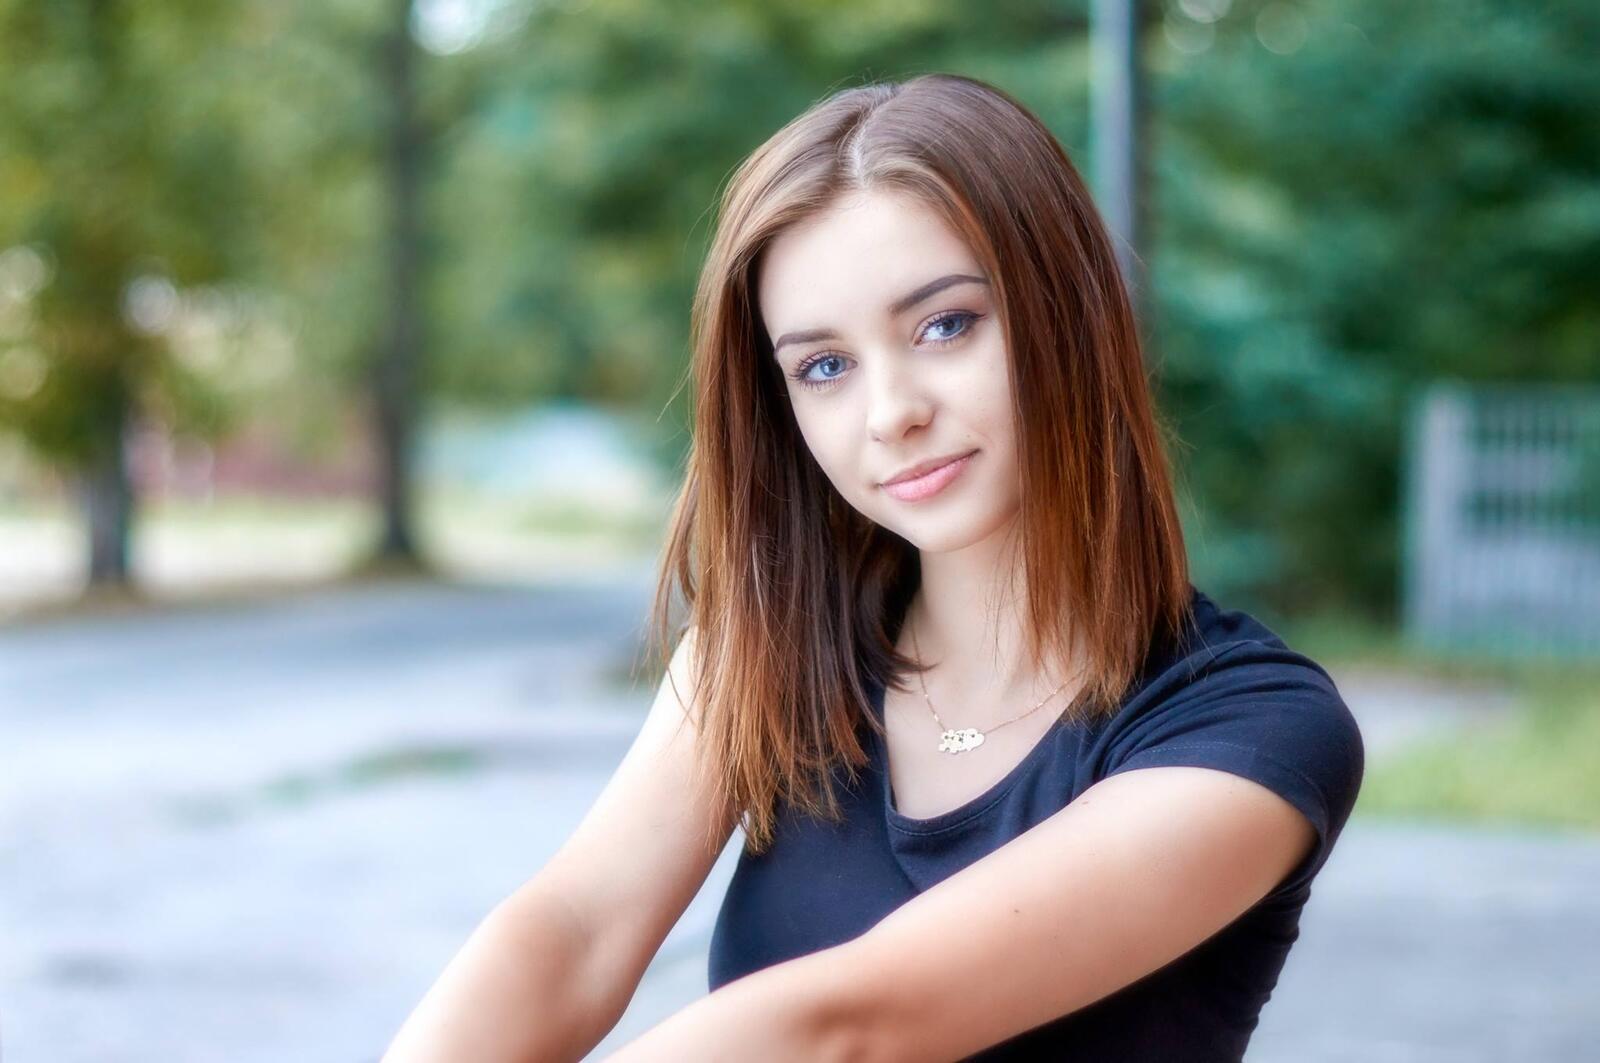 Free photo Beautiful brown-haired girl with blue eyes smiling on a park bench